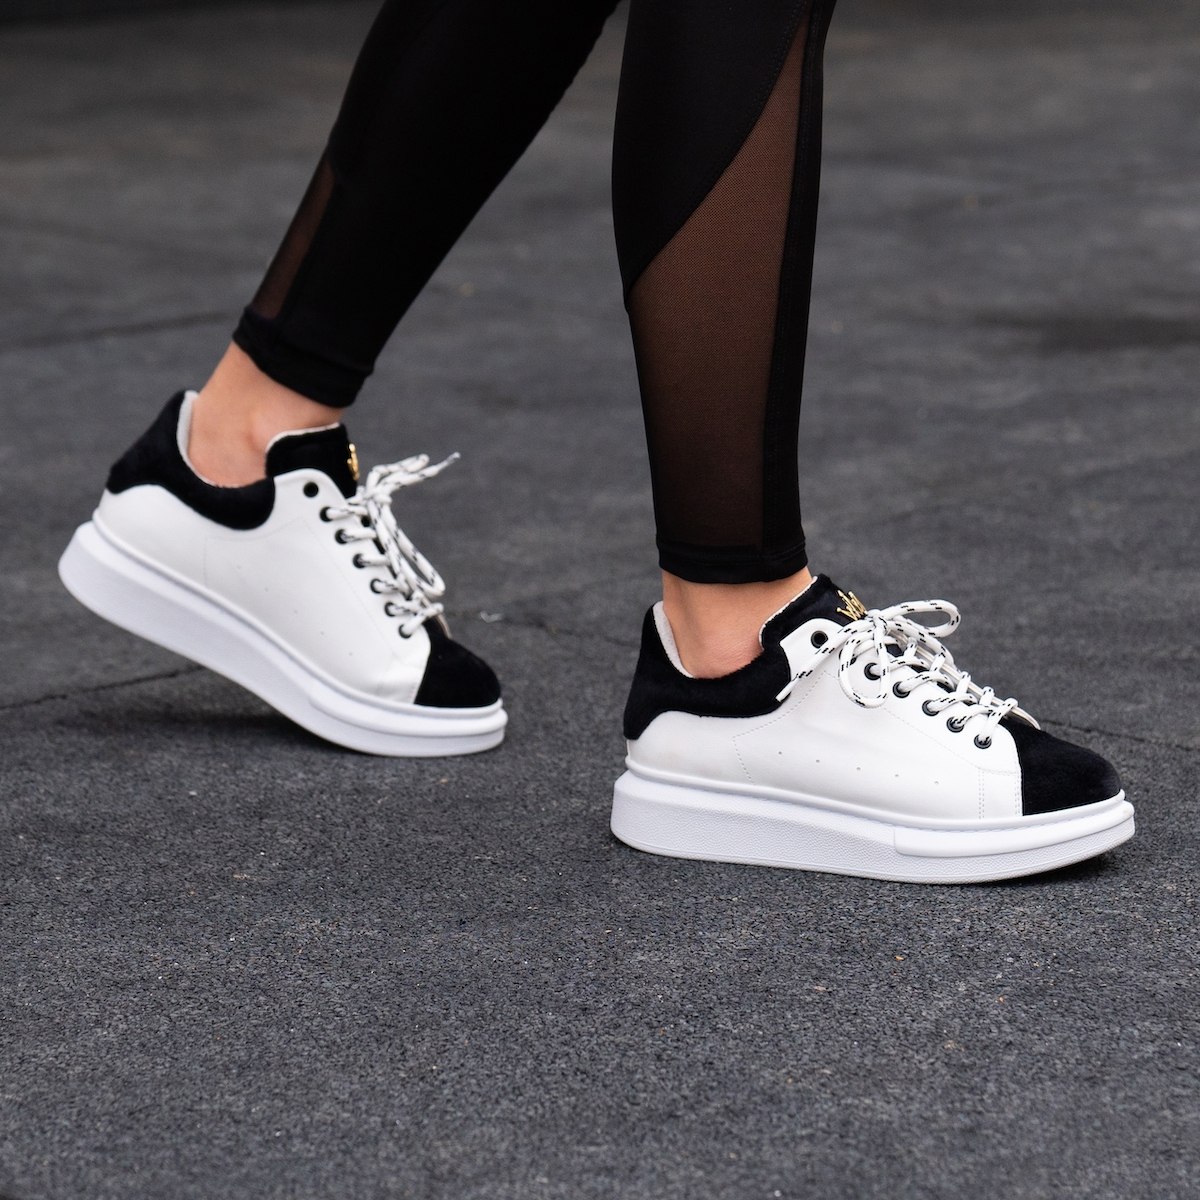 Woman Hype Sole Sneakers in White-Partial Short Black Fur | Martin Valen